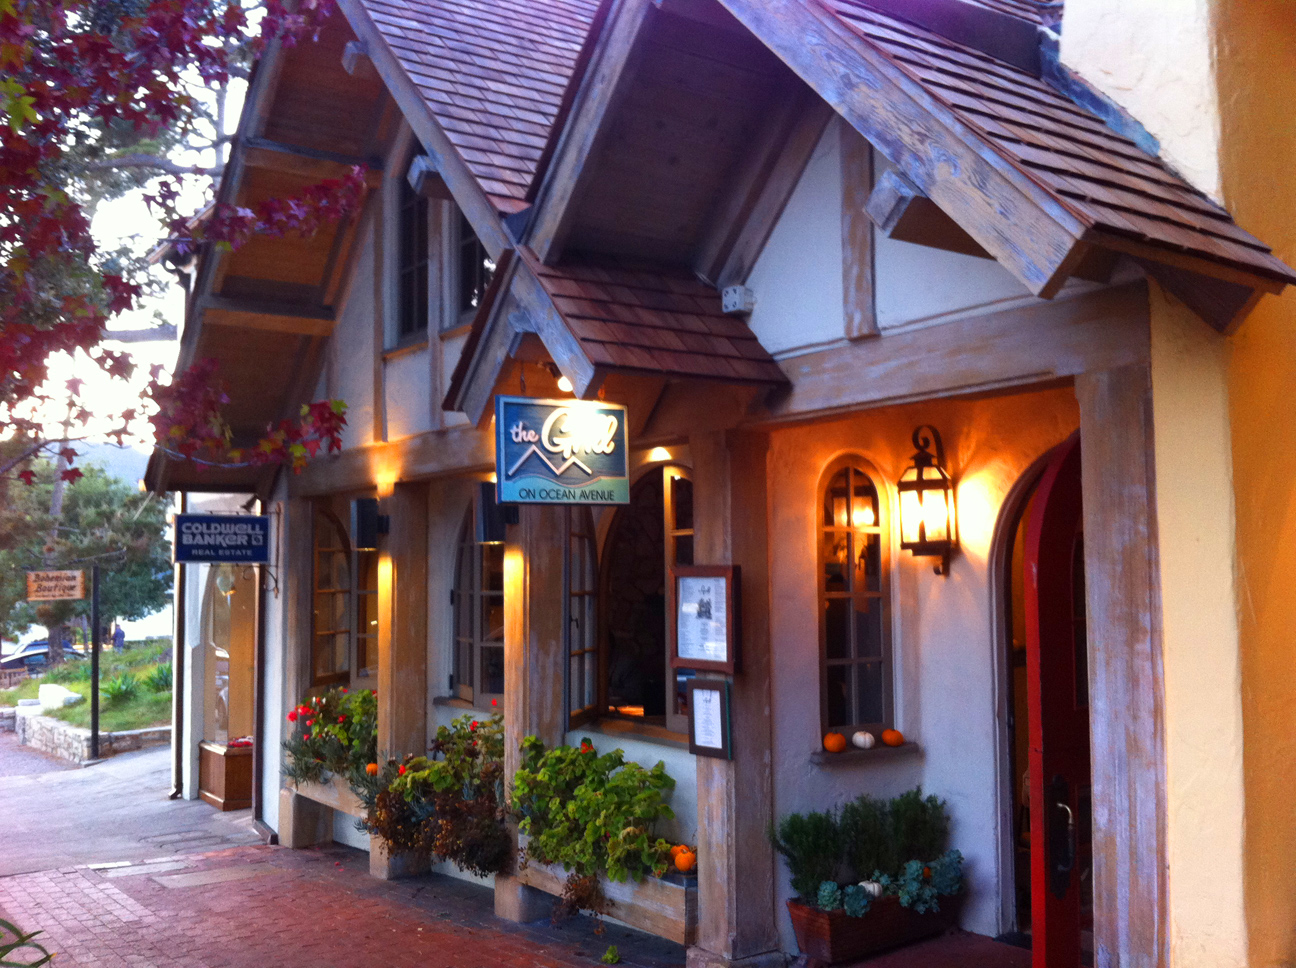 Carmel-by-the-Sea, Guide, Itinerary, Central Coast, California, Wine, Food and Drink, Travel